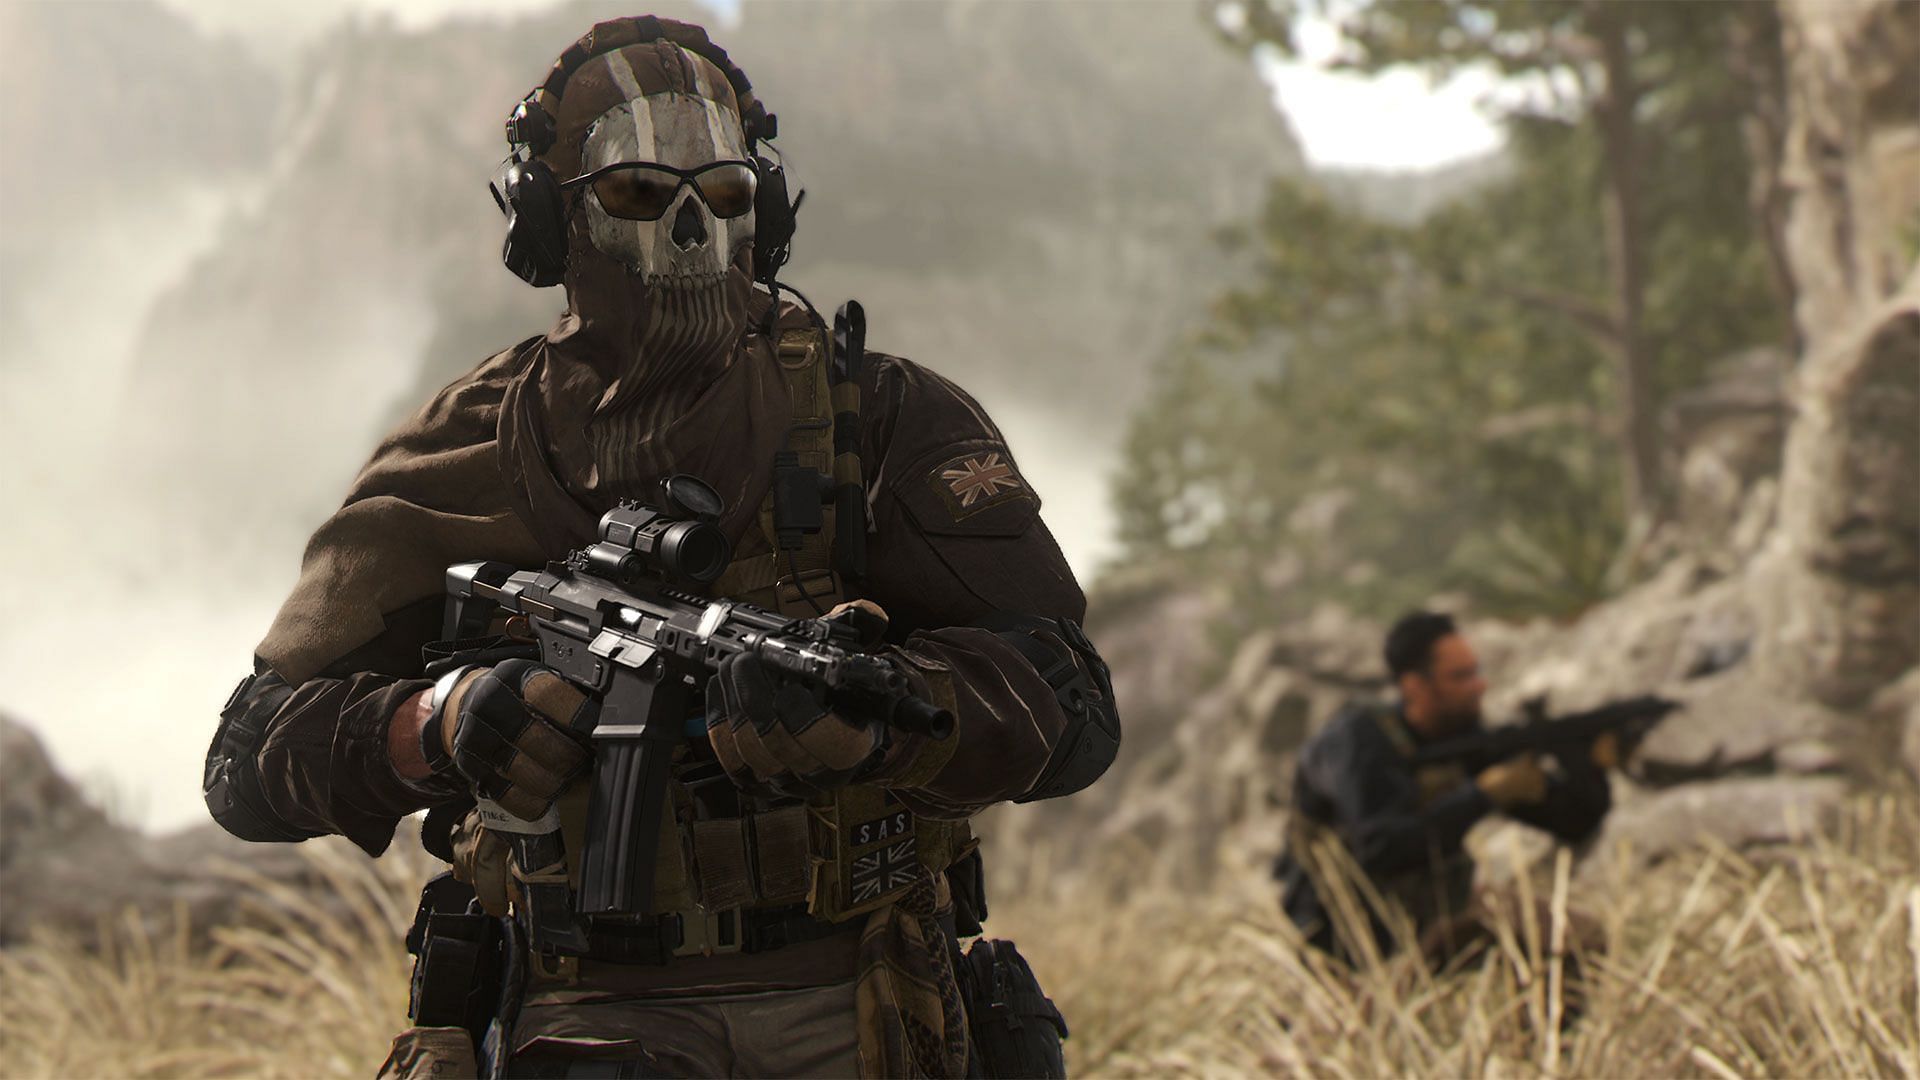 One AR stands out in Modern Warfare 2 (Image via Activision)